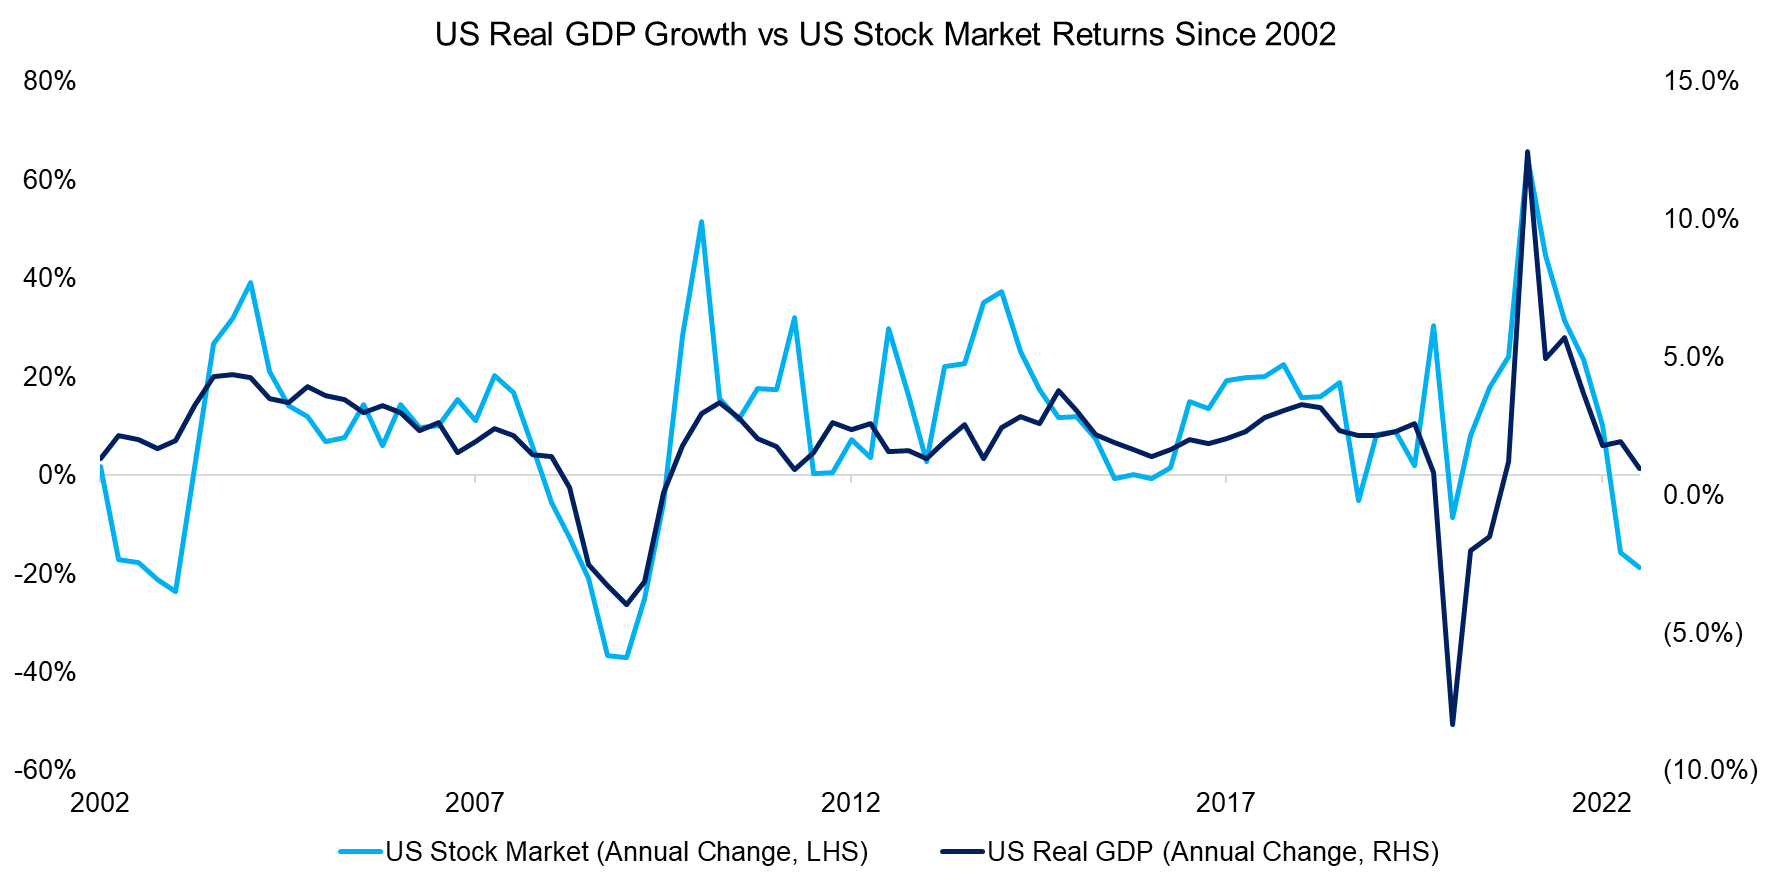 US Real GDP Growth vs US Stock Market Returns Since 2002